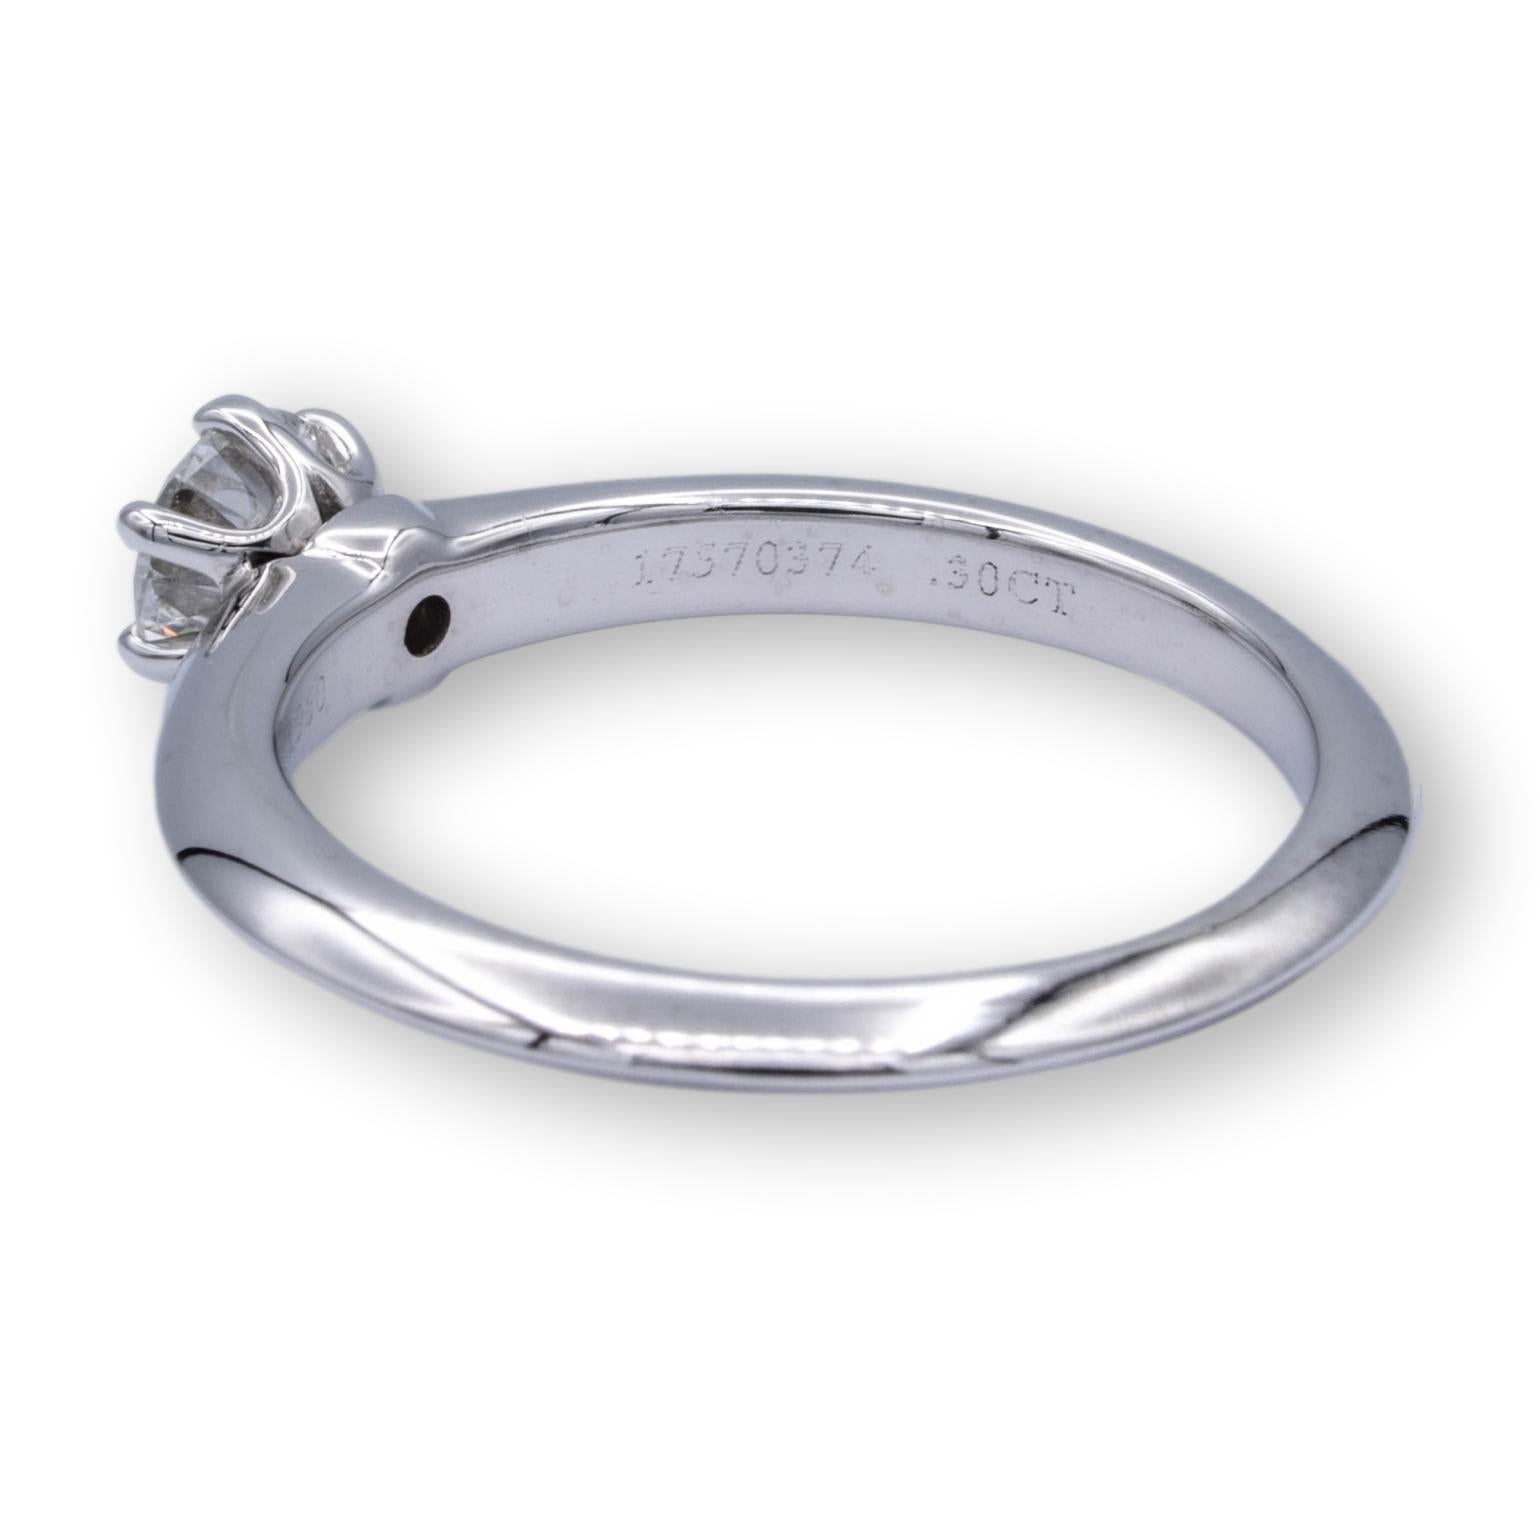 Contemporary Tiffany & Co. Platinum Solitaire Diamond Engagement Ring with Round 0.30 FVS1